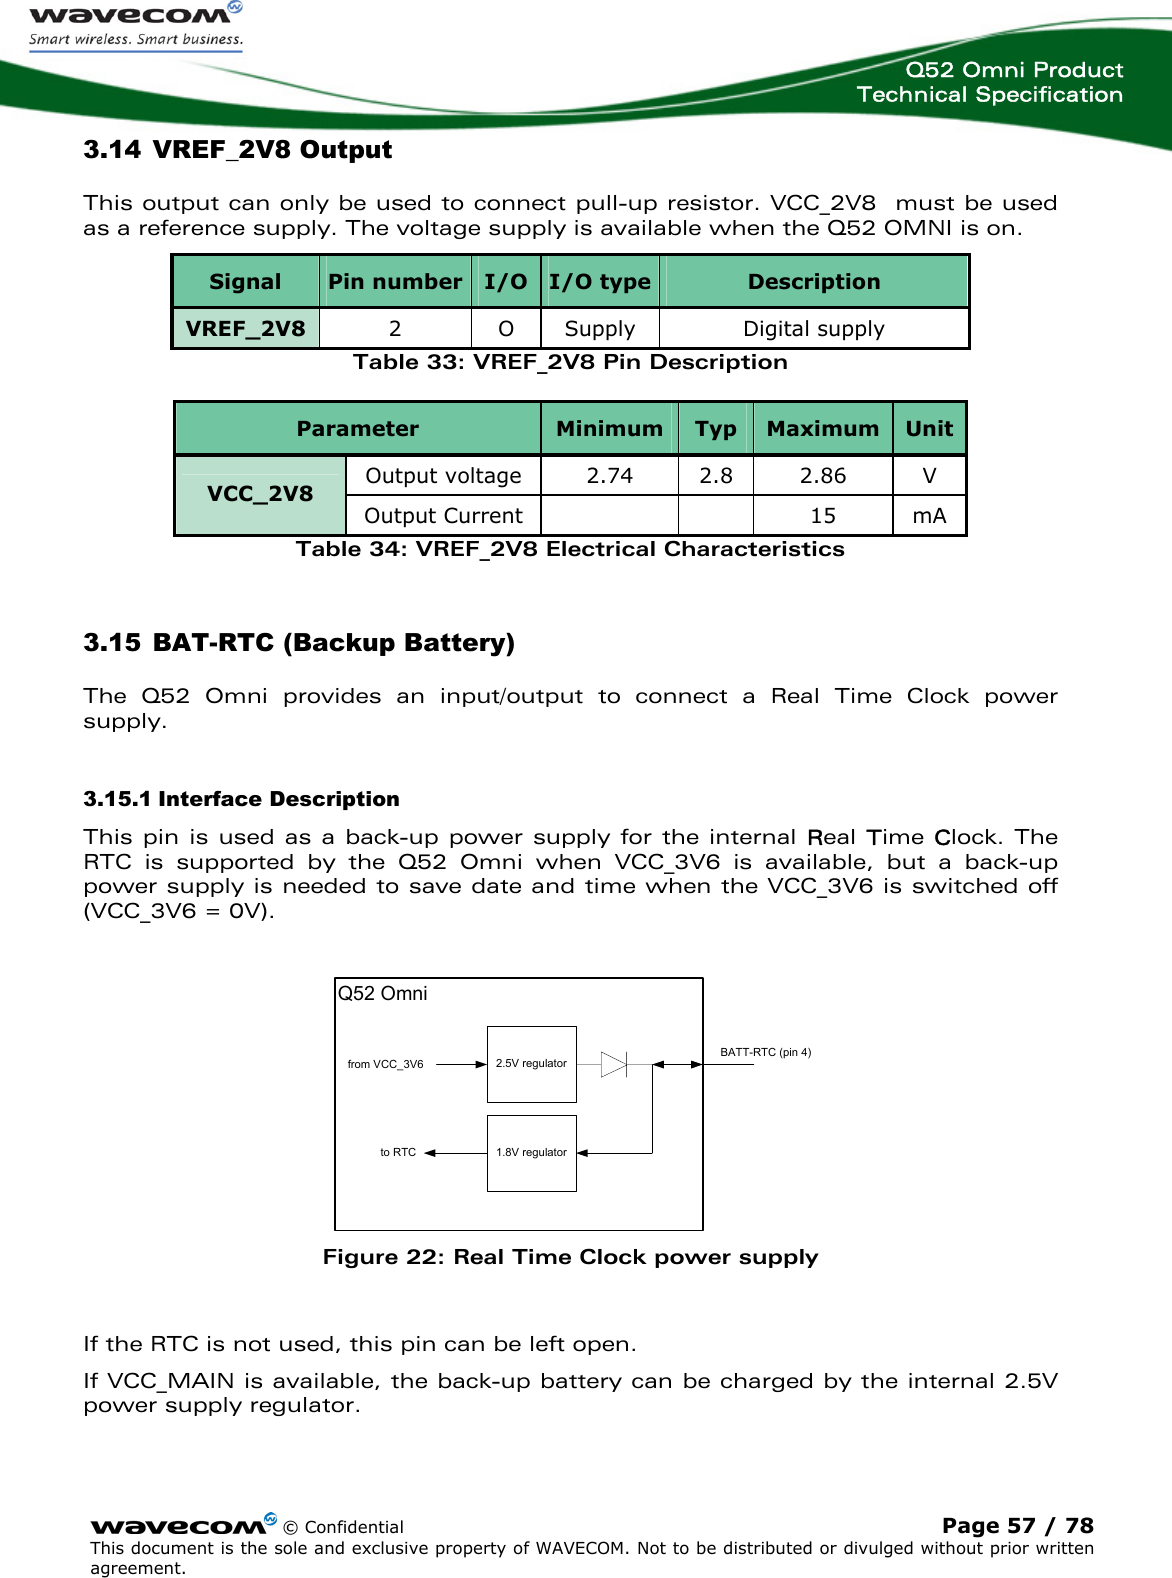  Q52 Omni Product Technical Specification   3.14 VREF_2V8 Output This output can only be used to connect pull-up resistor. VCC_2V8  must be used as a reference supply. The voltage supply is available when the Q52 OMNI is on. Signal  Pin number  I/O I/O type Description VREF_2V8  2 O Supply  Digital supply Table 33: VREF_2V8 Pin Description Parameter  Minimum Typ  Maximum  Unit Output voltage  2.74  2.8  2.86  V VCC_2V8 Output Current    15 mA Table 34: VREF_2V8 Electrical Characteristics 3.15 BAT-RTC (Backup Battery) The Q52 Omni provides an input/output to connect a Real Time Clock power supply. 3.15.1 Interface Description This pin is used as a back-up power supply for the internal Real Time  Clock. The RTC is supported by the Q52 Omni when VCC_3V6 is available, but a back-up power supply is needed to save date and time when the VCC_3V6 is switched off (VCC_3V6 = 0V).   © Confidential Page 57 / 78 This document is the sole and exclusive property of WAVECOM. Not to be distributed or divulged without prior written agreement.  2.5V regulator1.8V regulatorfrom VCC_3V6Q52 Omnito RTCBATT-RTC (pin 4) Figure 22: Real Time Clock power supply  If the RTC is not used, this pin can be left open. If VCC_MAIN is available, the back-up battery can be charged by the internal 2.5V power supply regulator.  